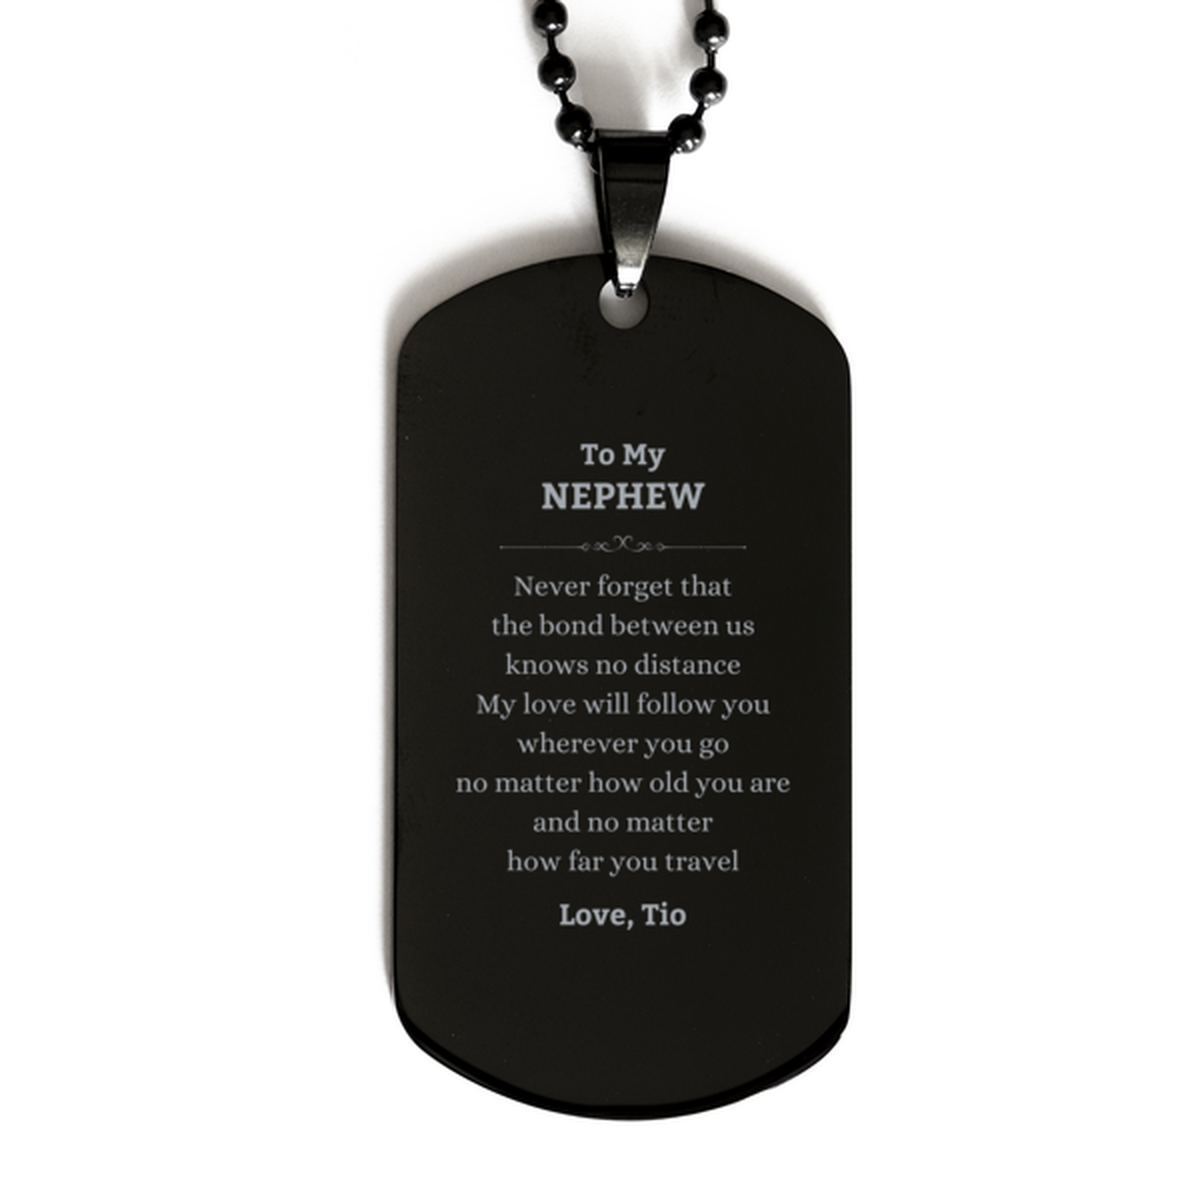 Nephew Birthday Gifts from Tio, Adjustable Black Dog Tag for Nephew Christmas Graduation Unique Gifts Nephew Never forget that the bond between us knows no distance. Love, Tio